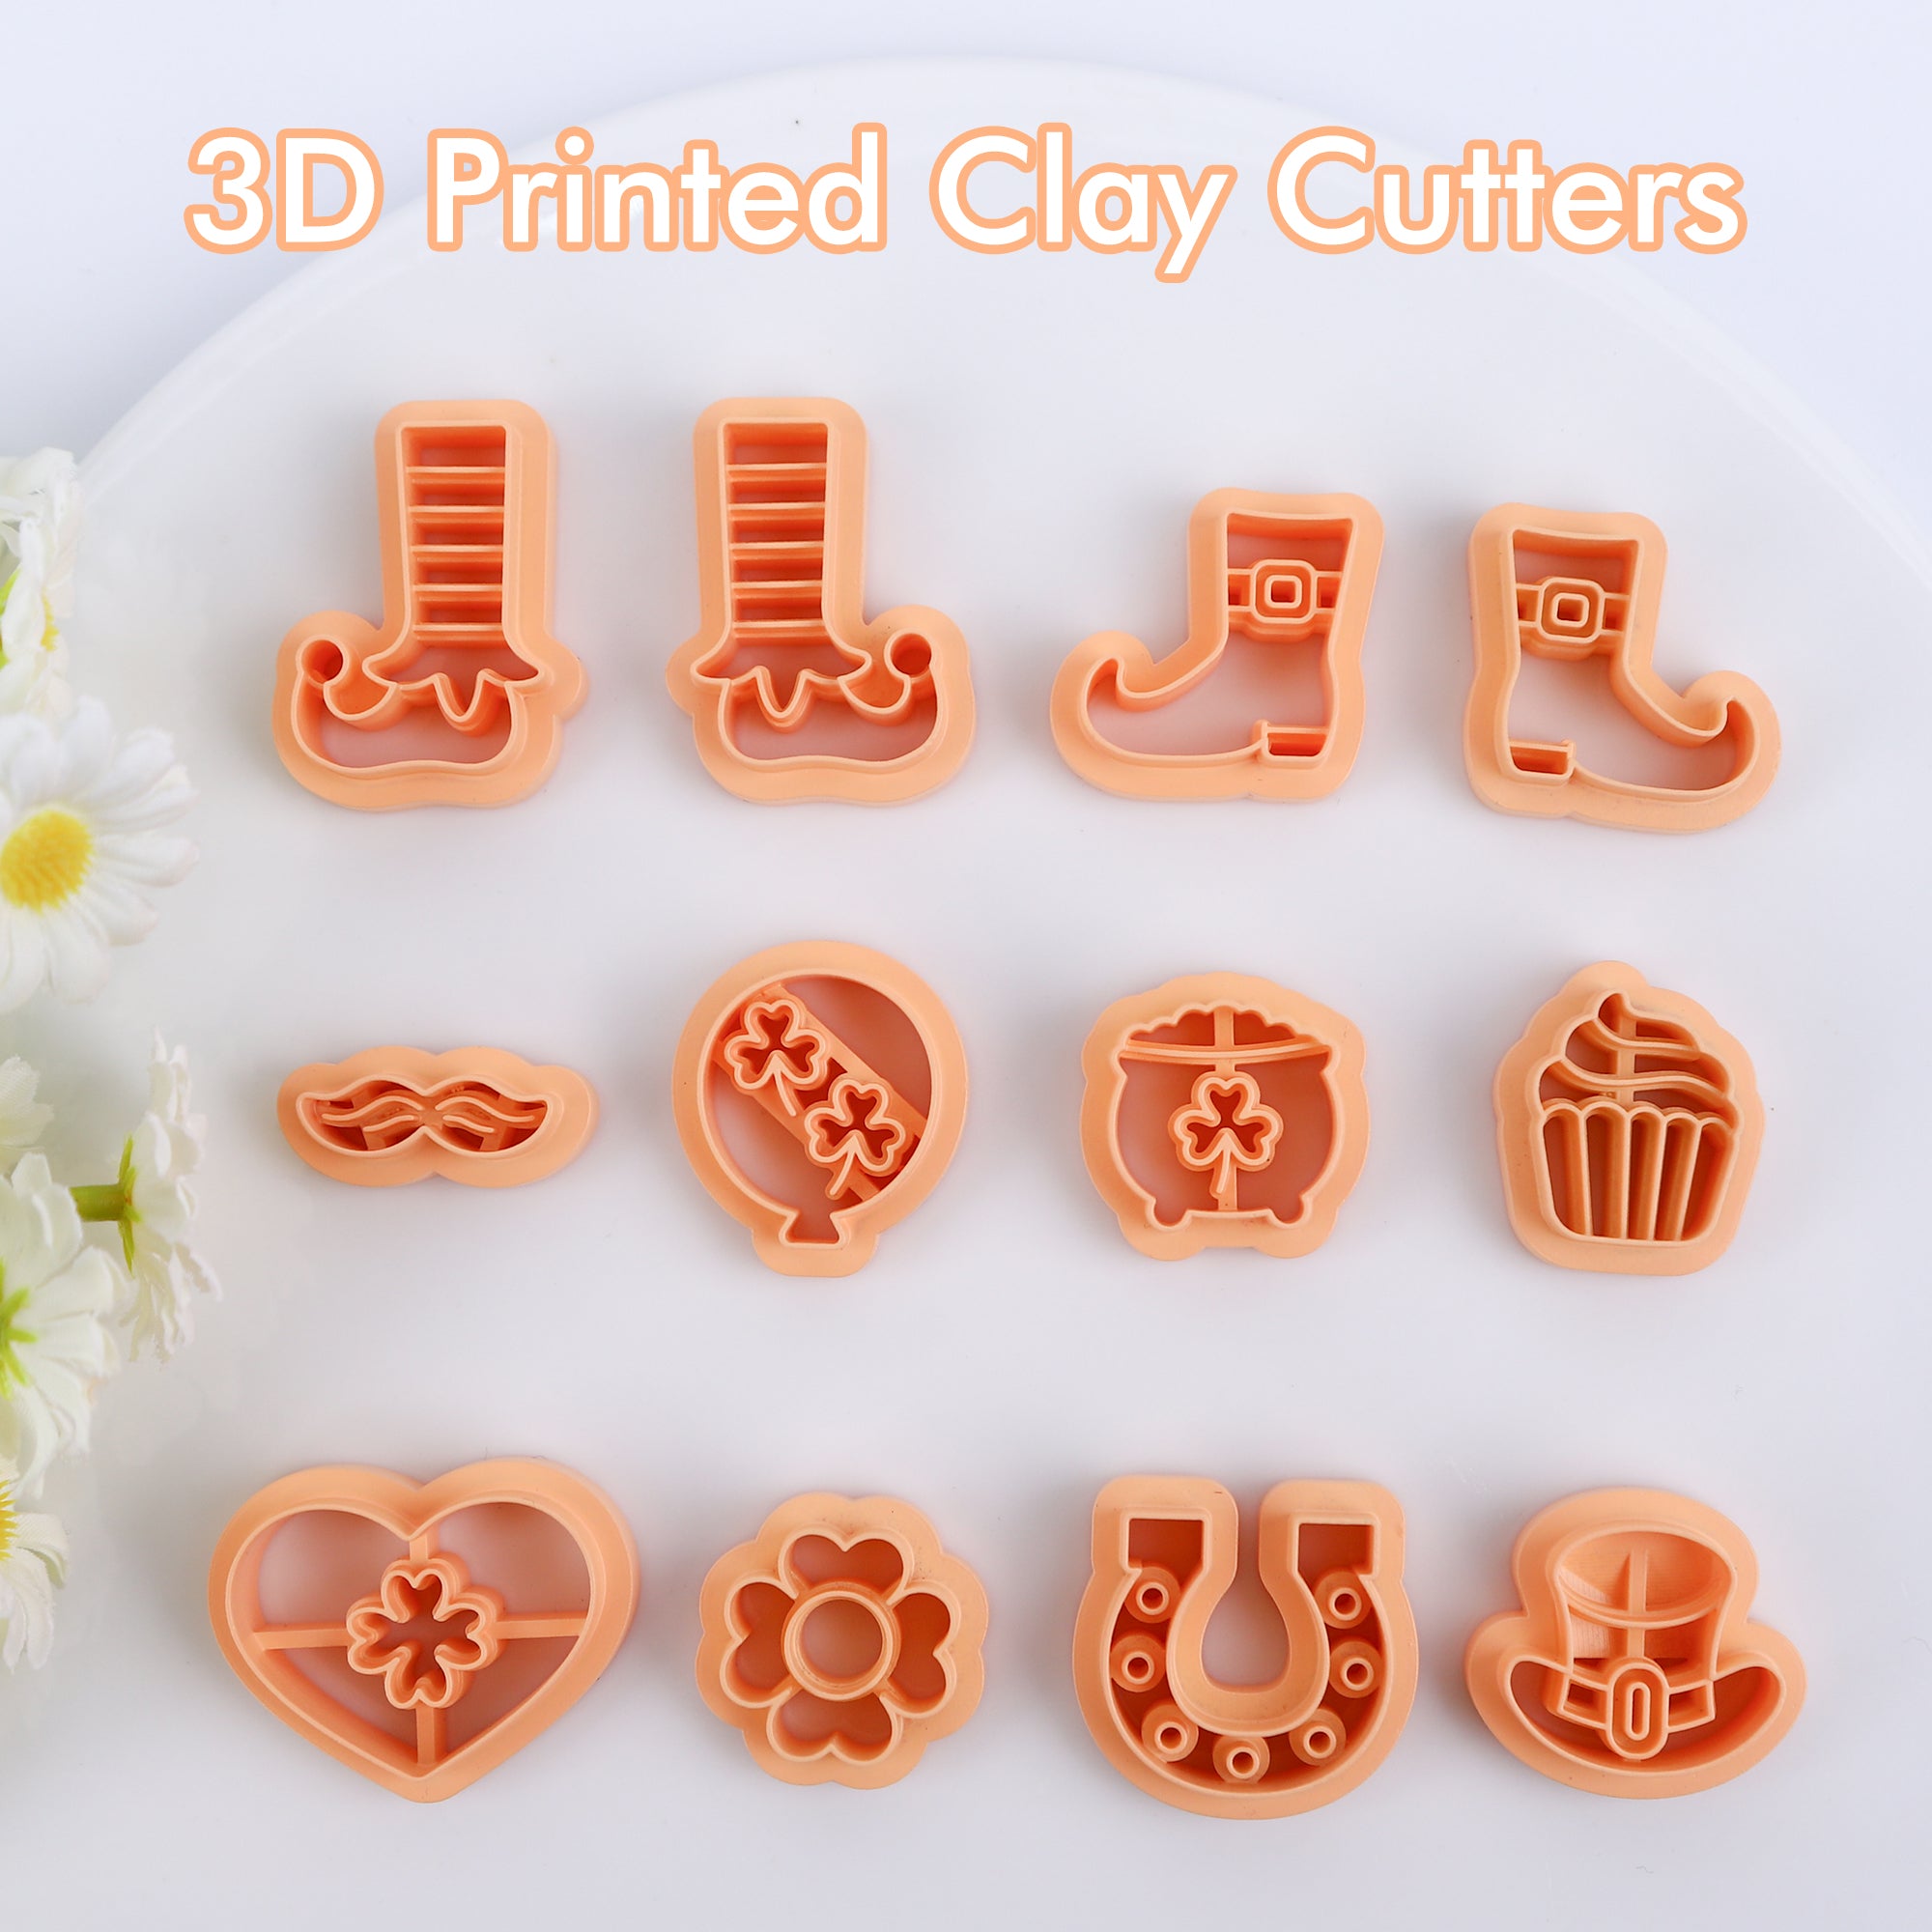  Puocaon Potted Plant Clay Stamps - 12 Pcs Acrylic